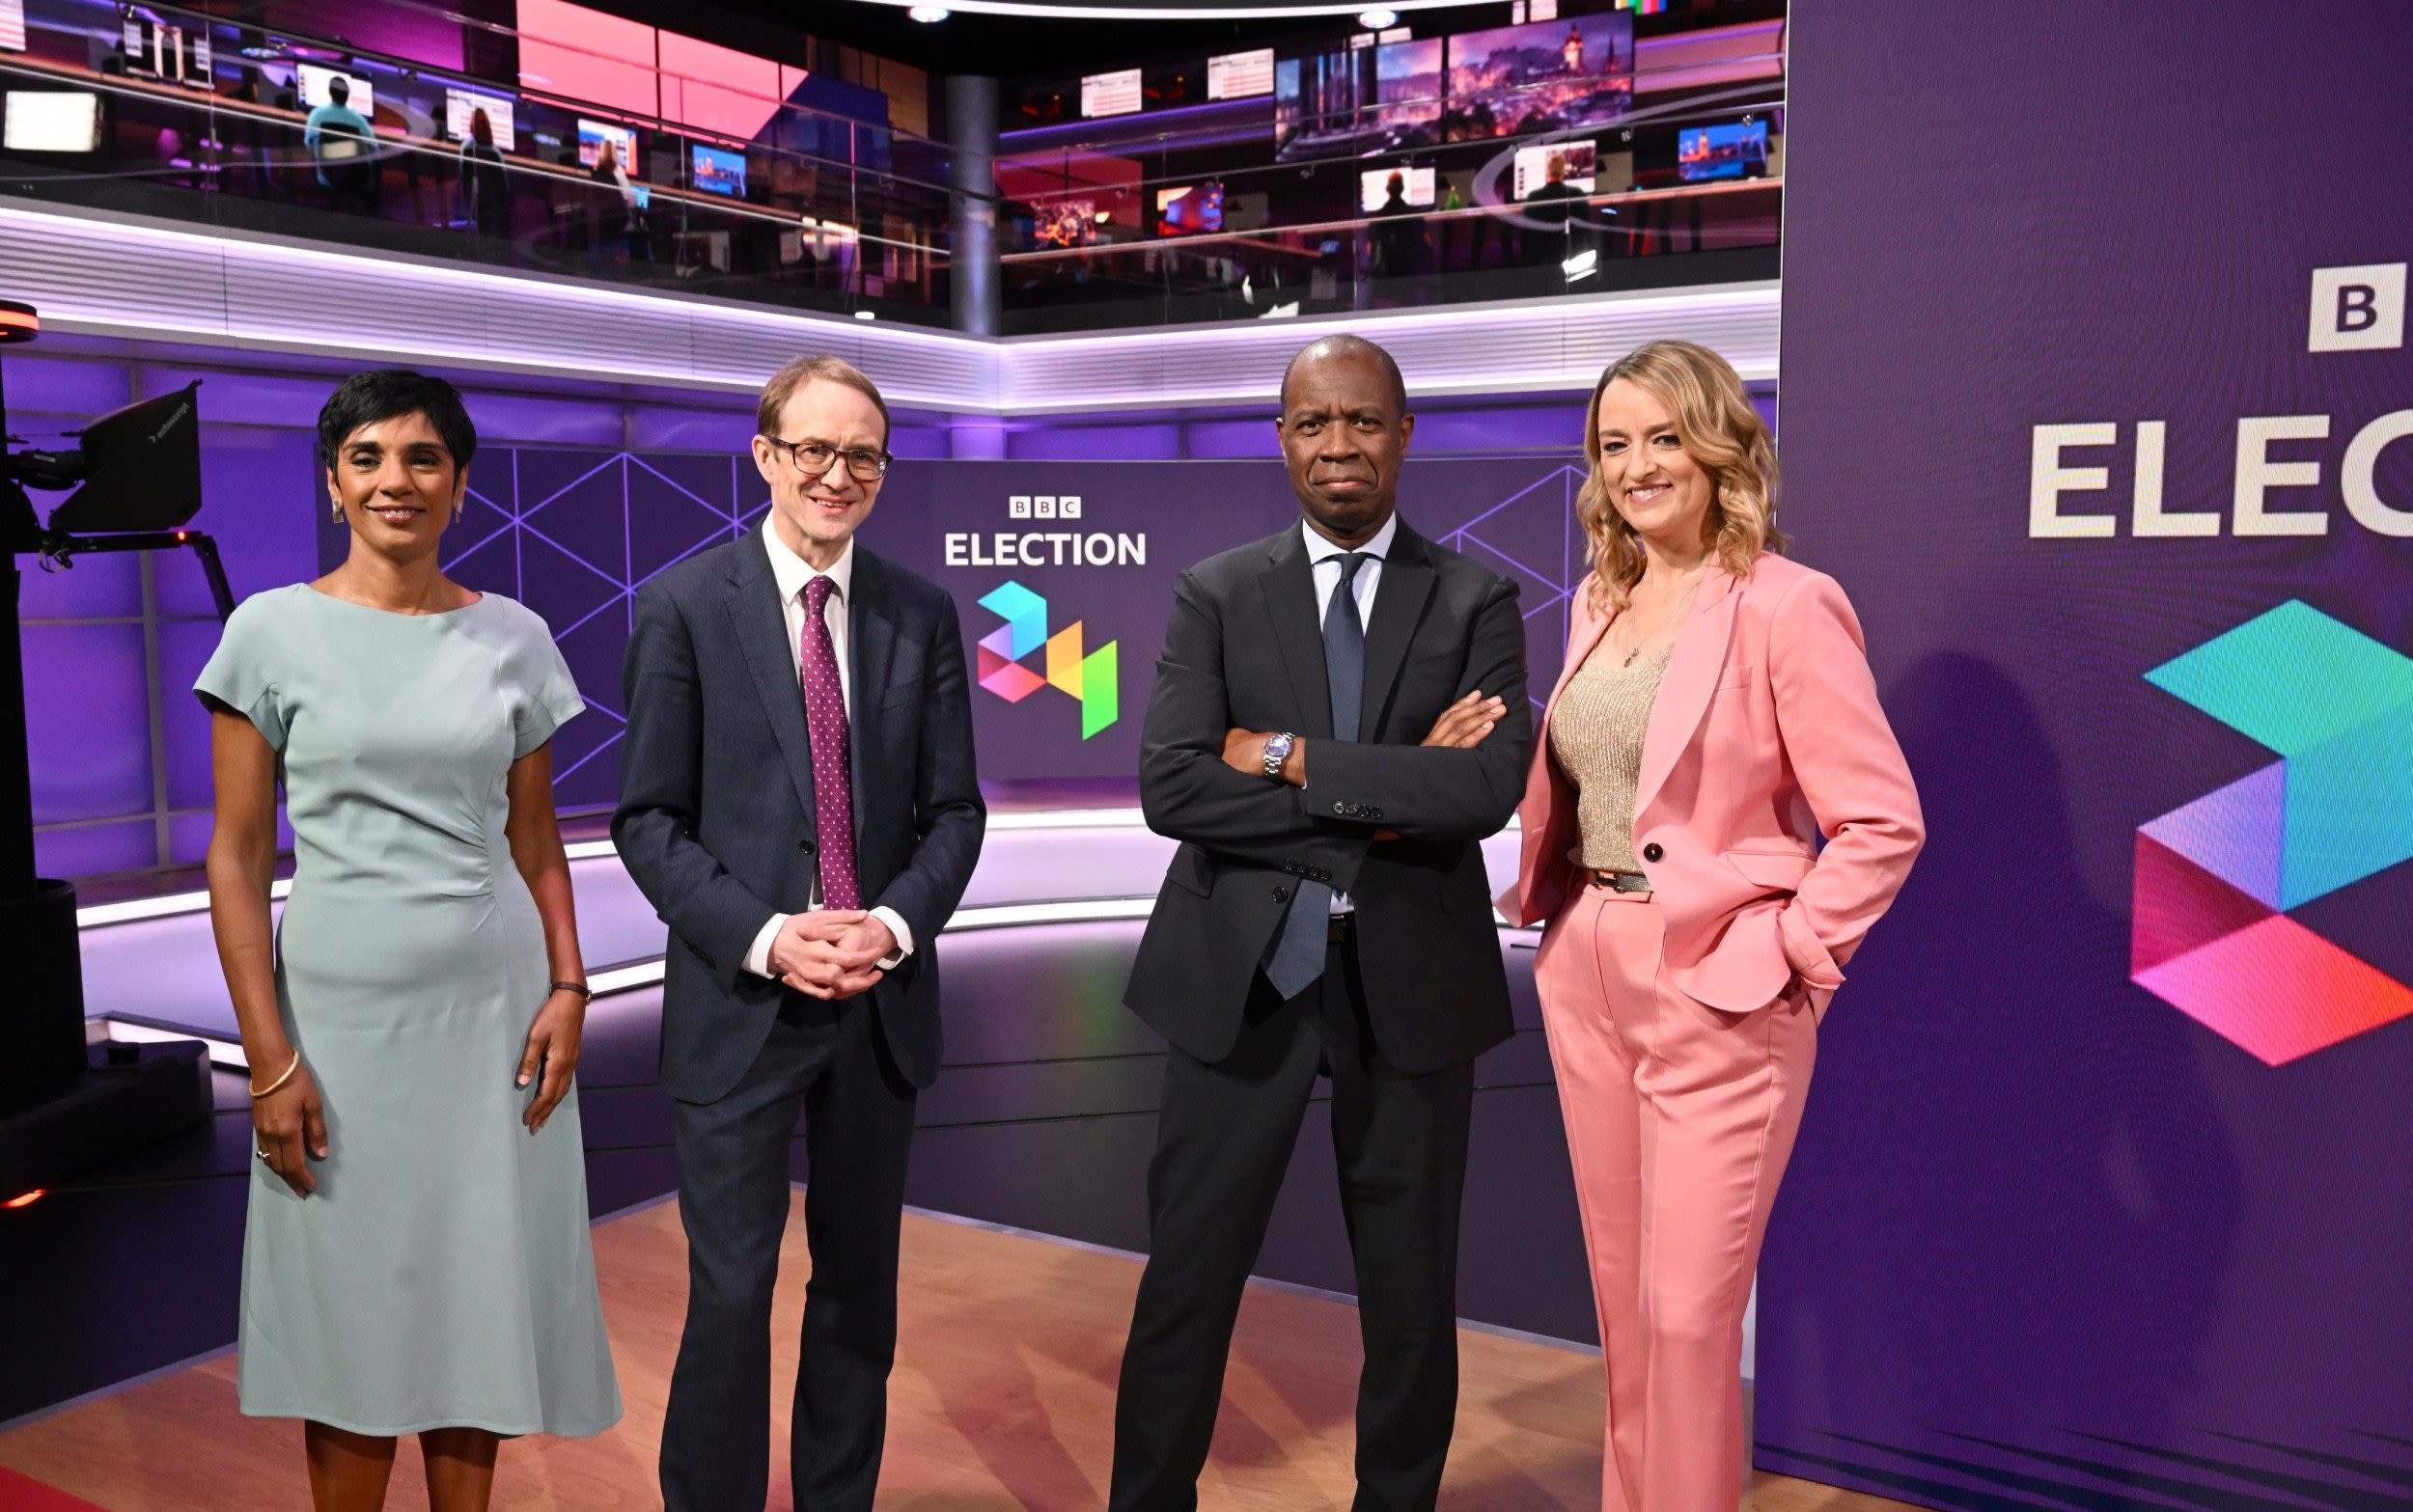 Where the BBC went wrong on election night